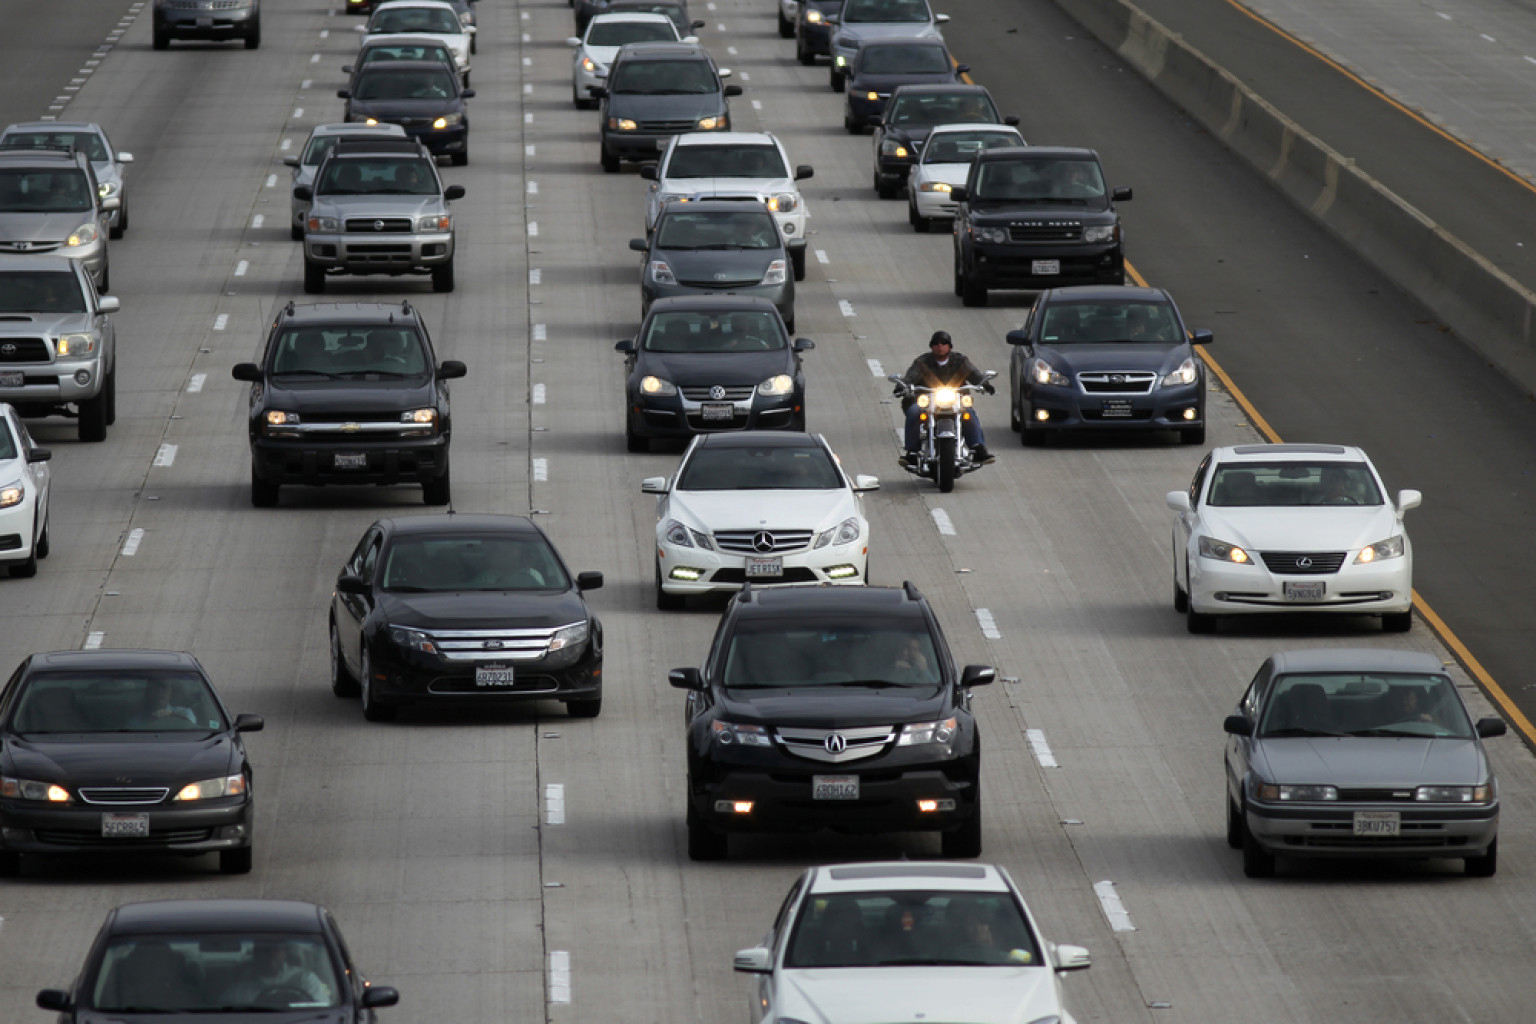 Los Angeles motorists suffer from the worst traffic in the US, logging 90 hours a year behind the wheel.